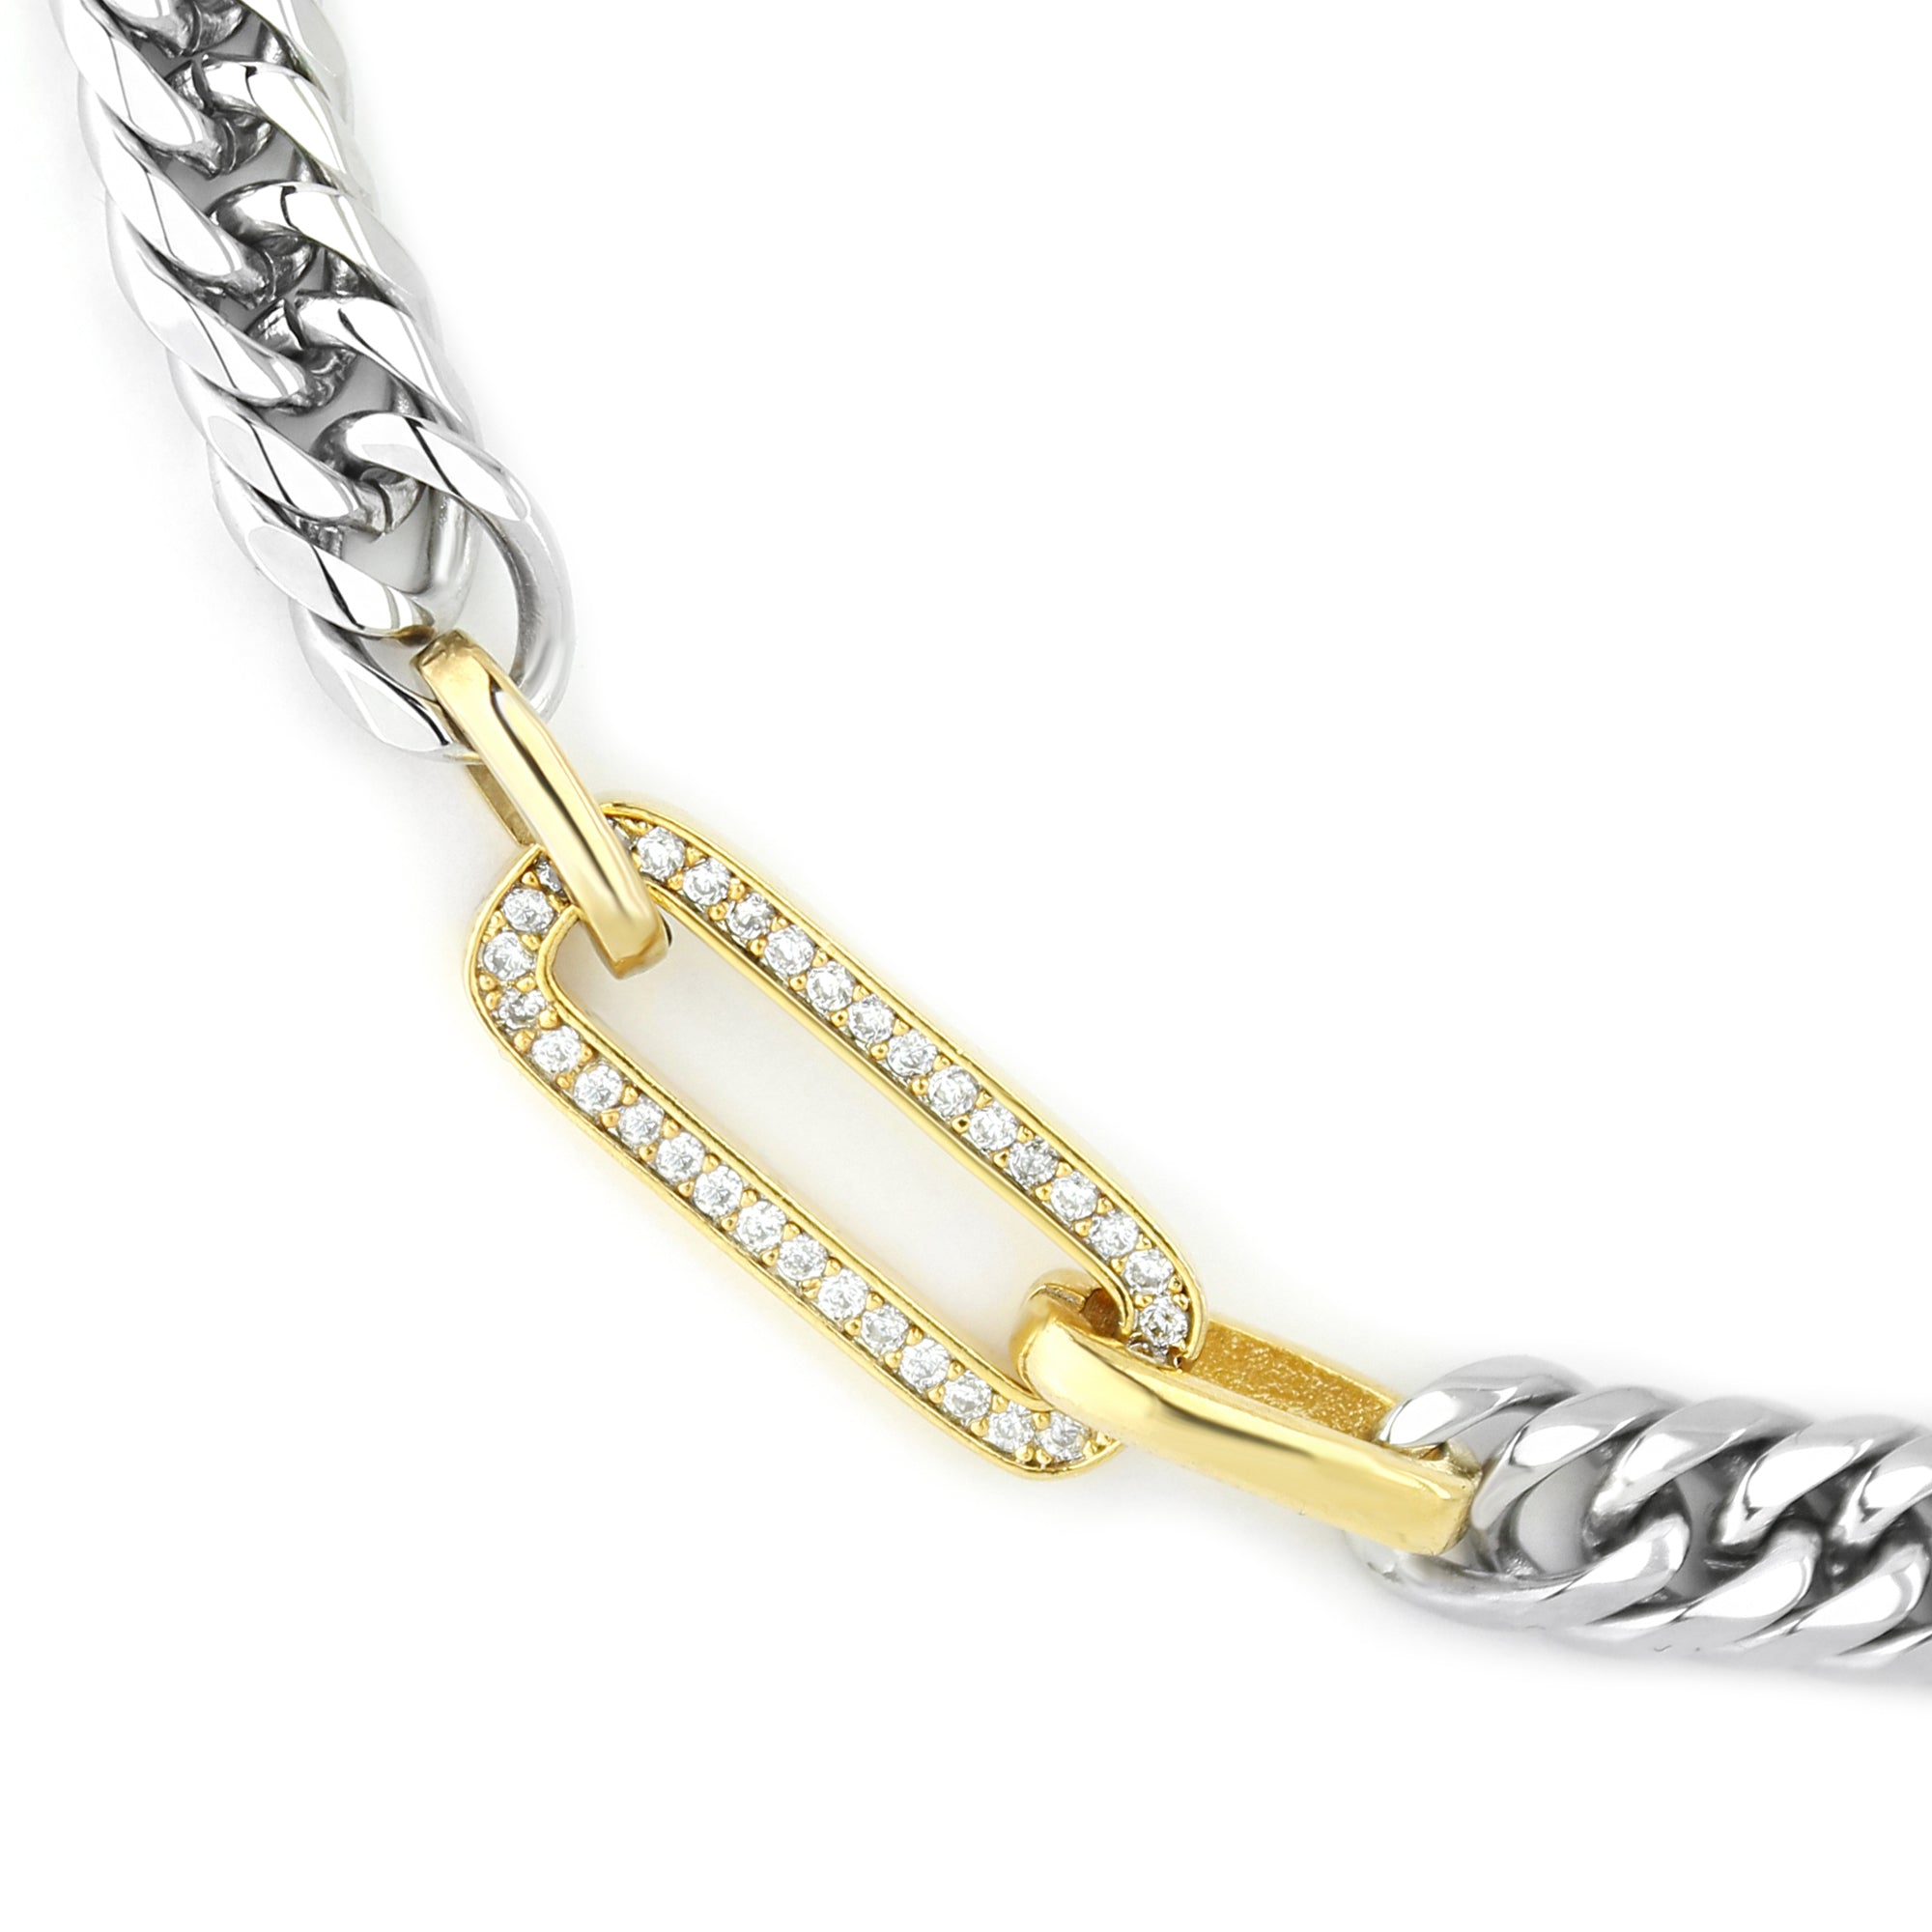 Men's West Coast Jewelry Stainless Steel Spiga Chain Necklace